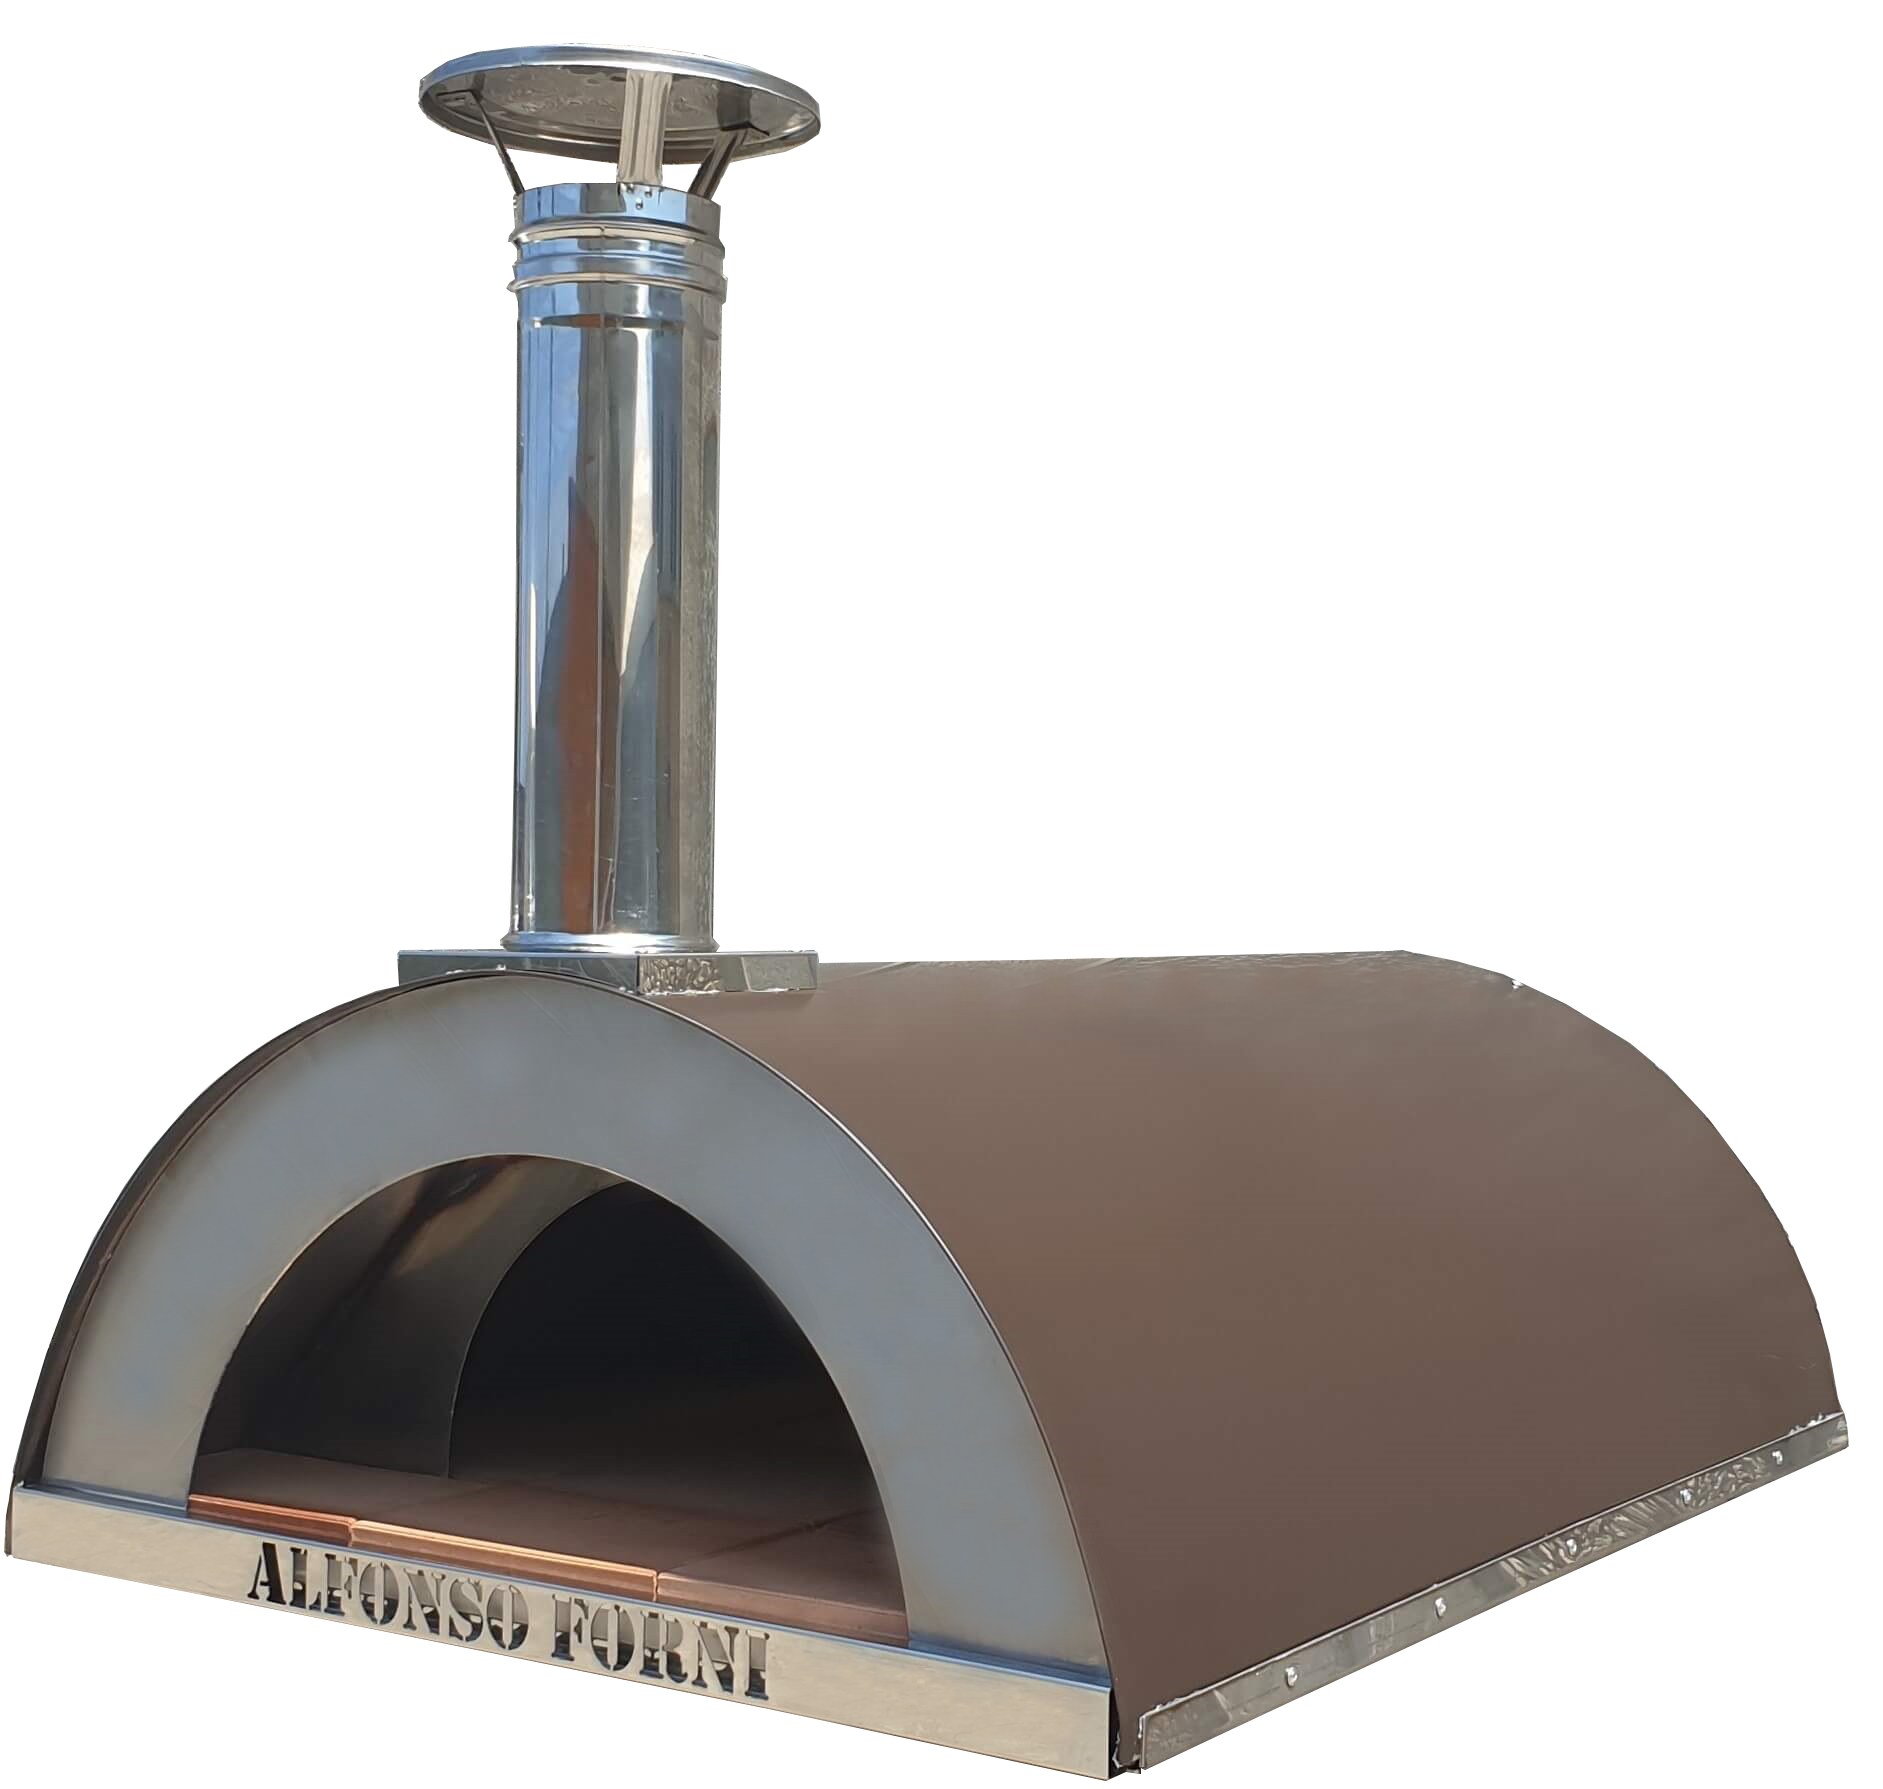 forno a legna alfonso 4 pizze full optional total inox !